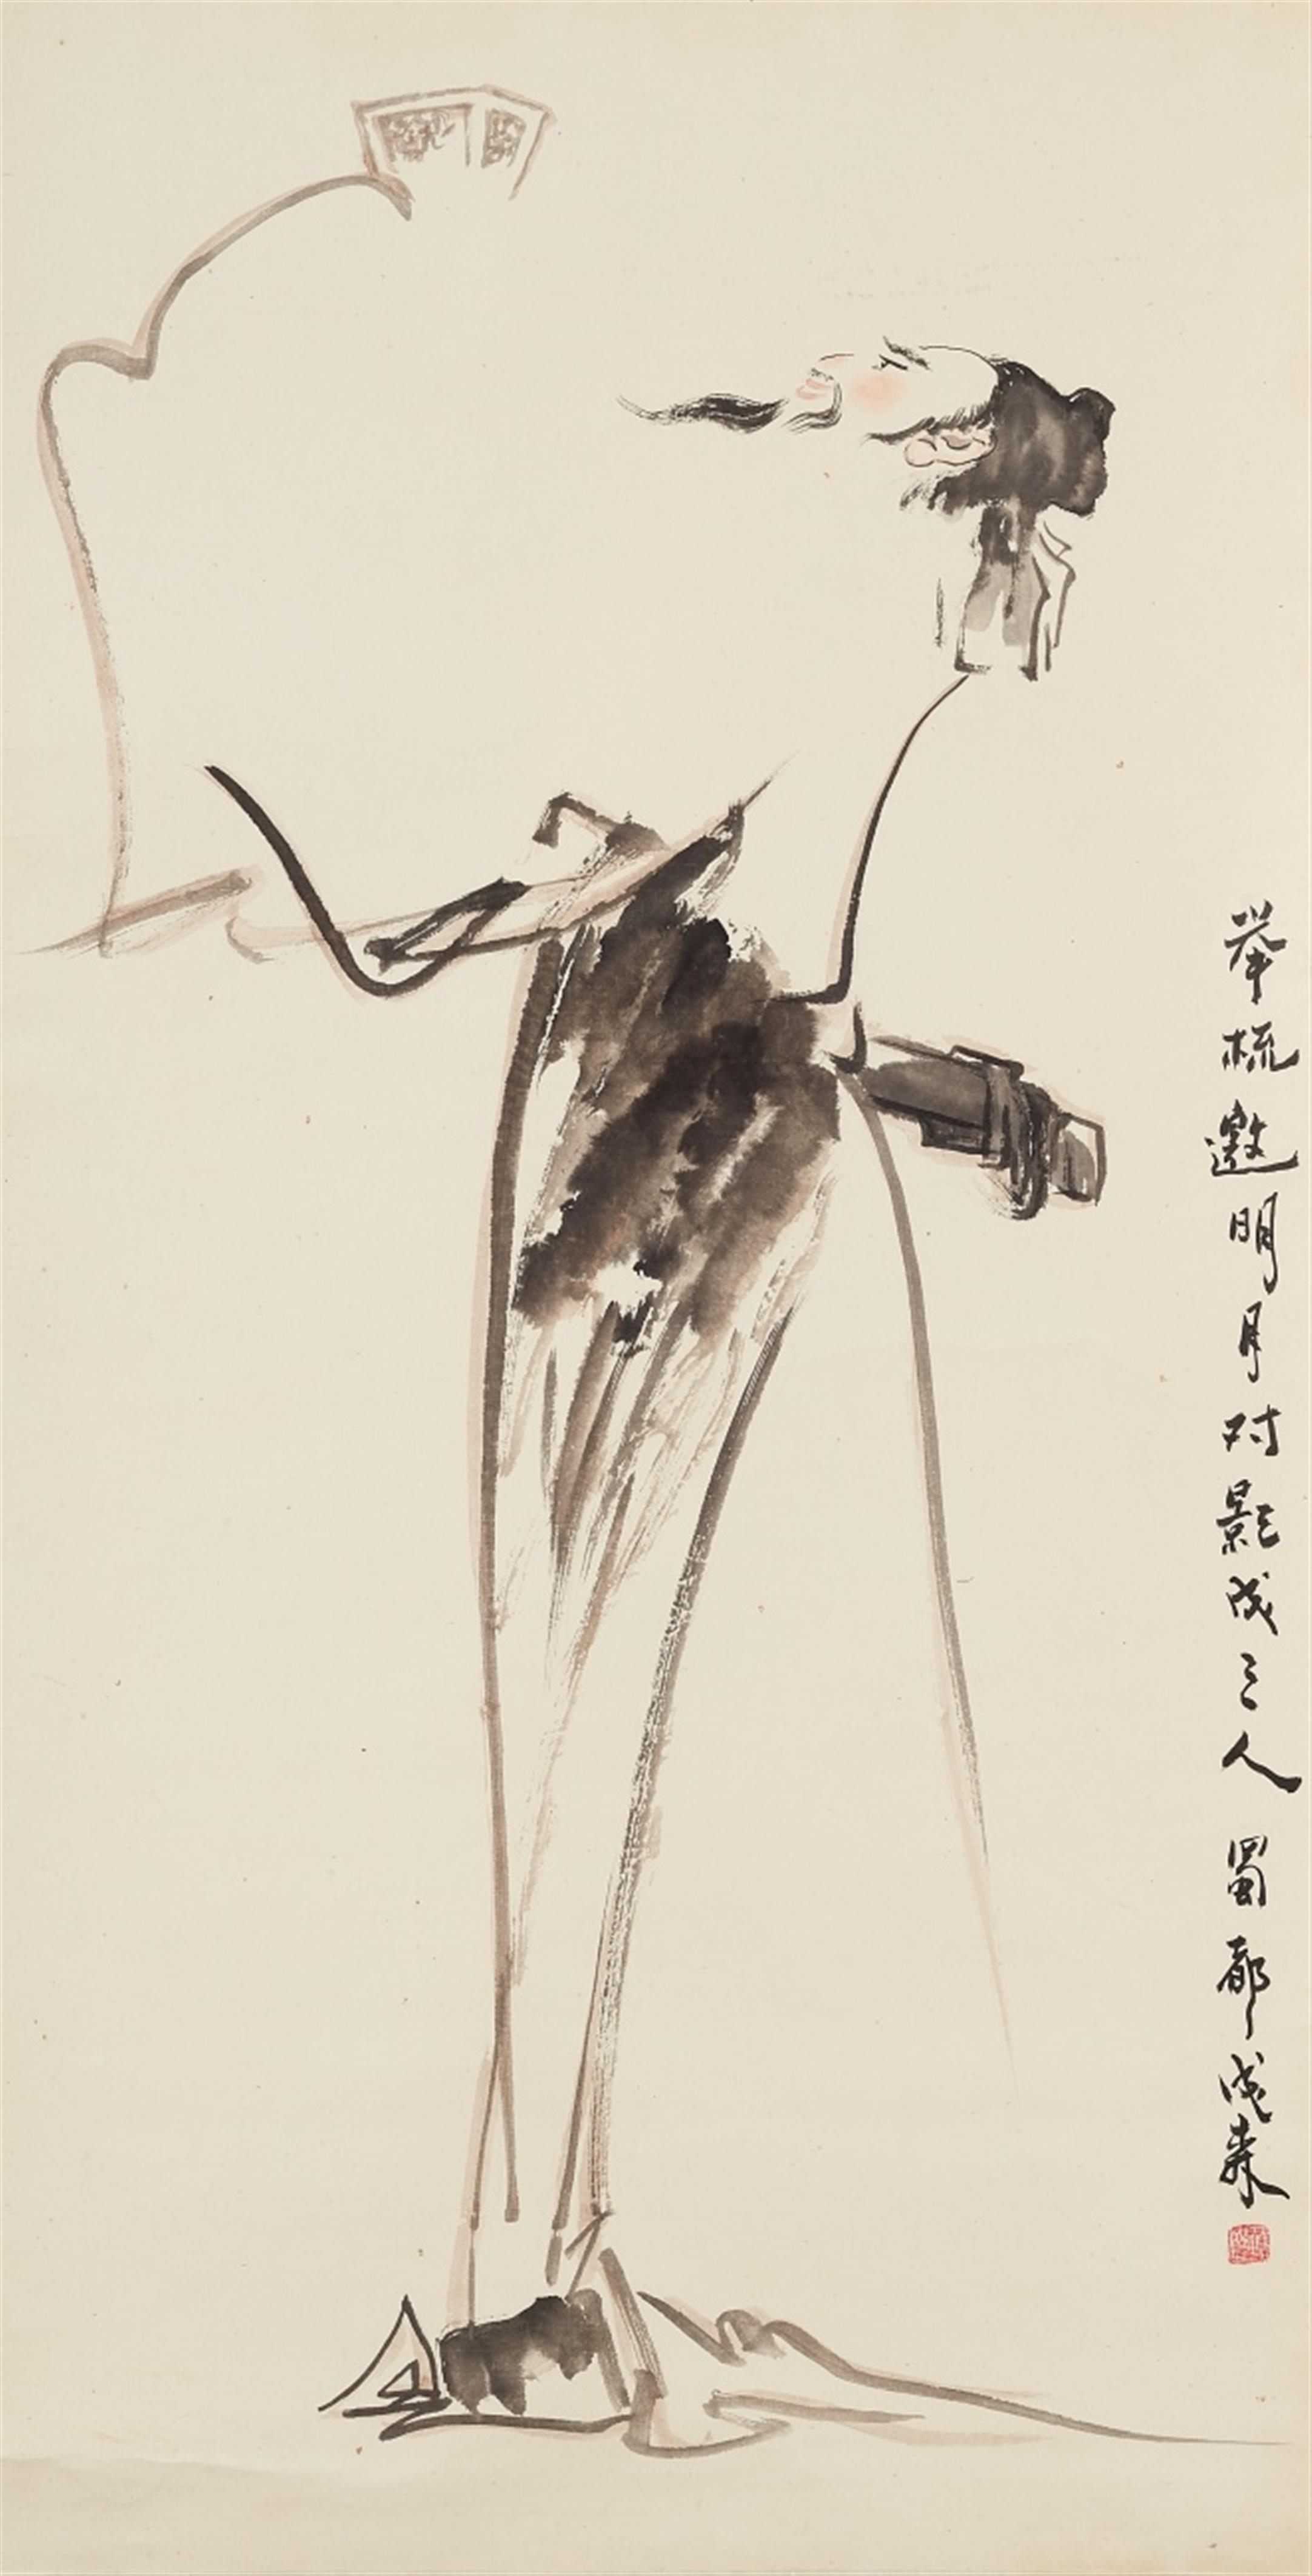 Unidentified artist
Unknown artist . 20th century - The poet Li Bai. Hanging scroll. Ink and light colour on paper. Inscription, signed Shu Du ... shou and sealed. - image-1